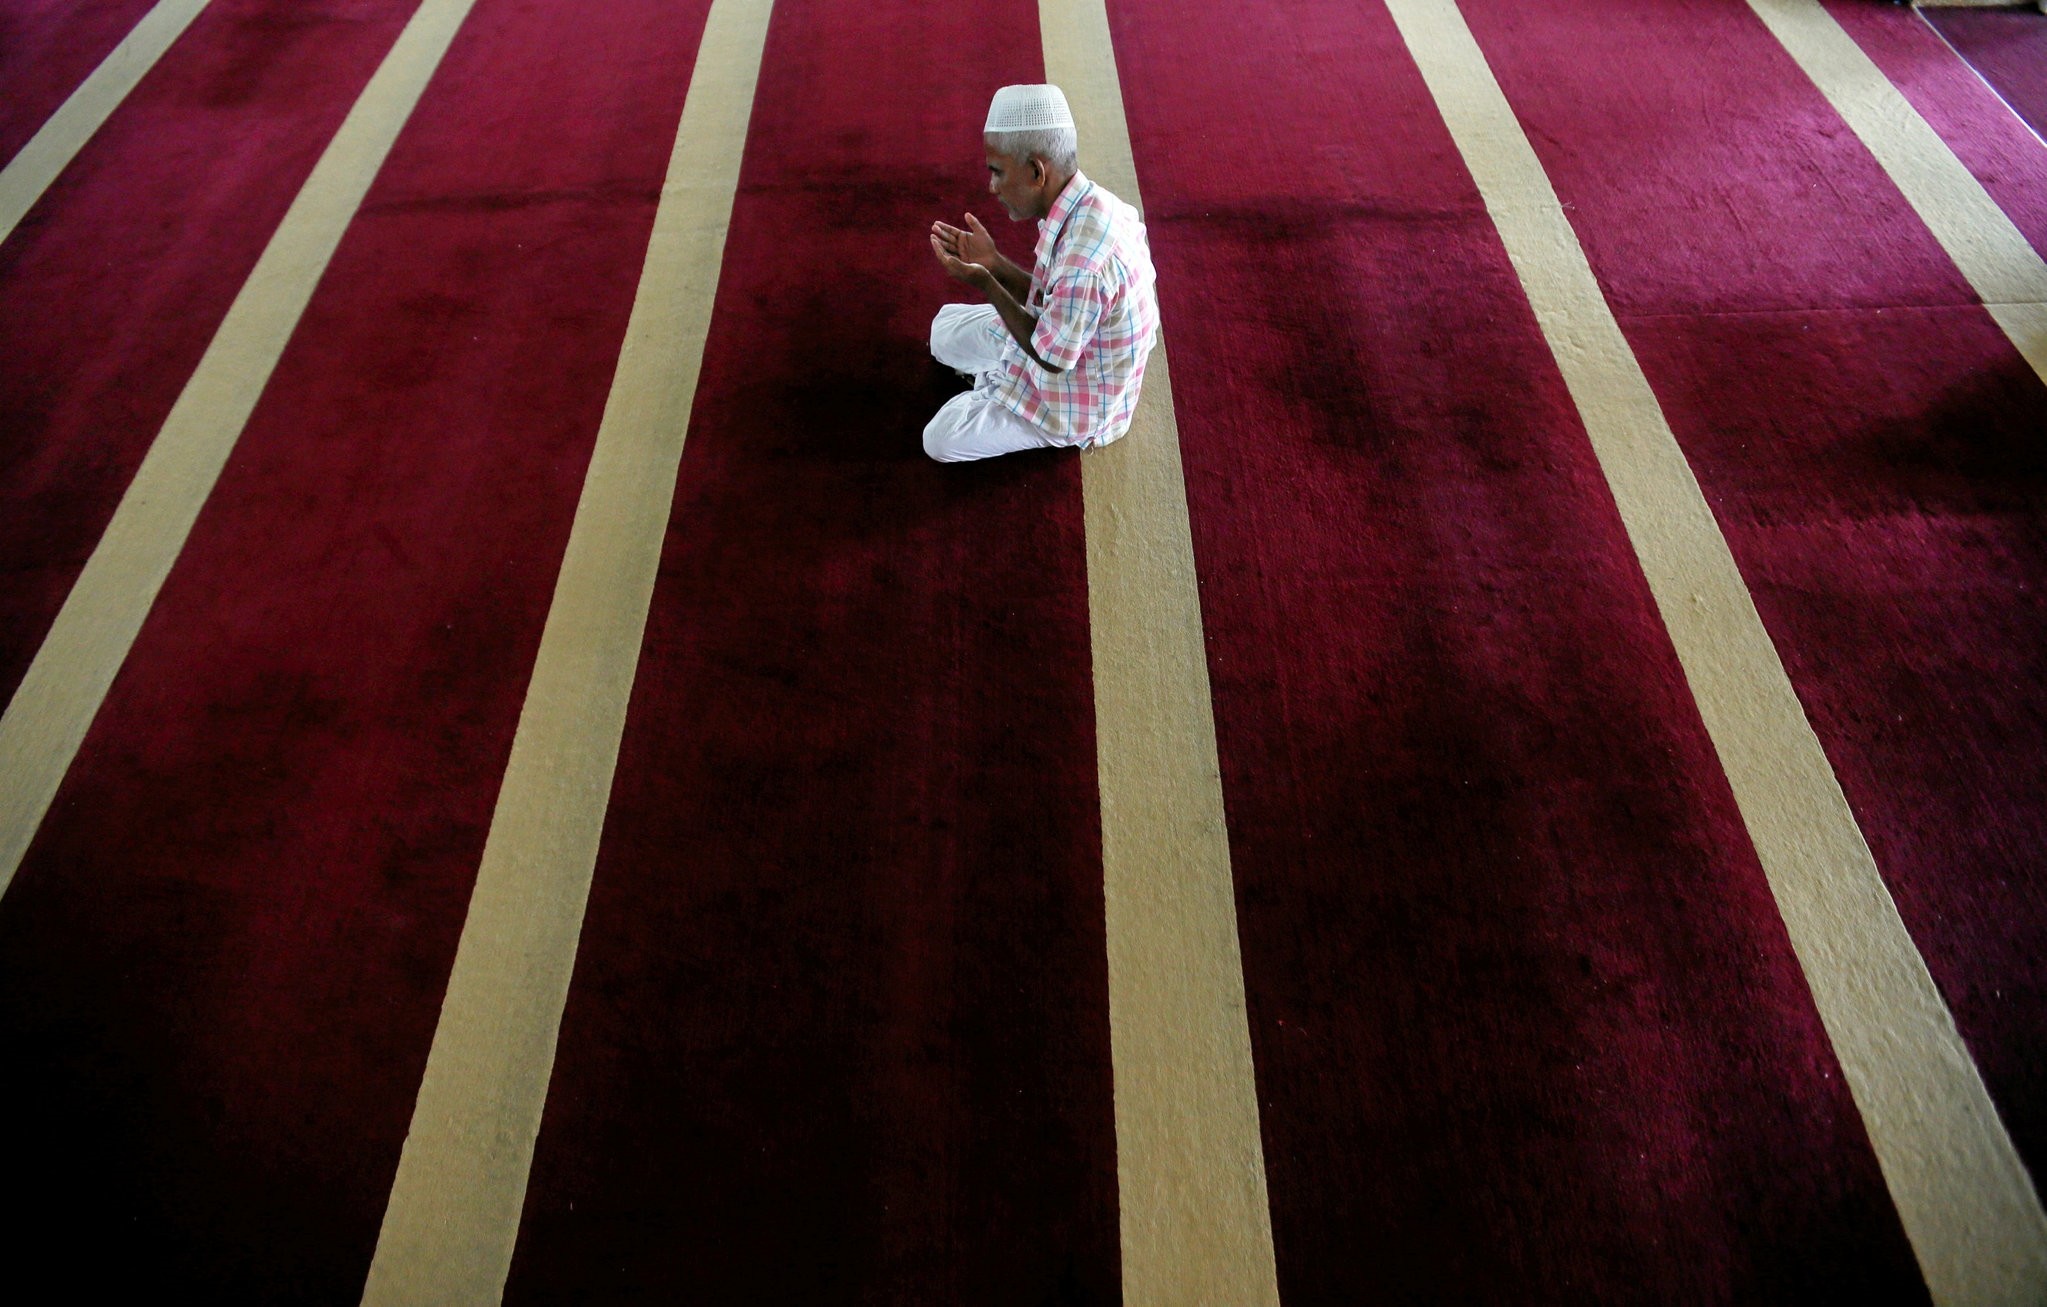 A Muslim man prays during the holy month of Ramadan at a mosque in Kalutara, Sri Lanka June 15, 2017. (REUTERS Photo)